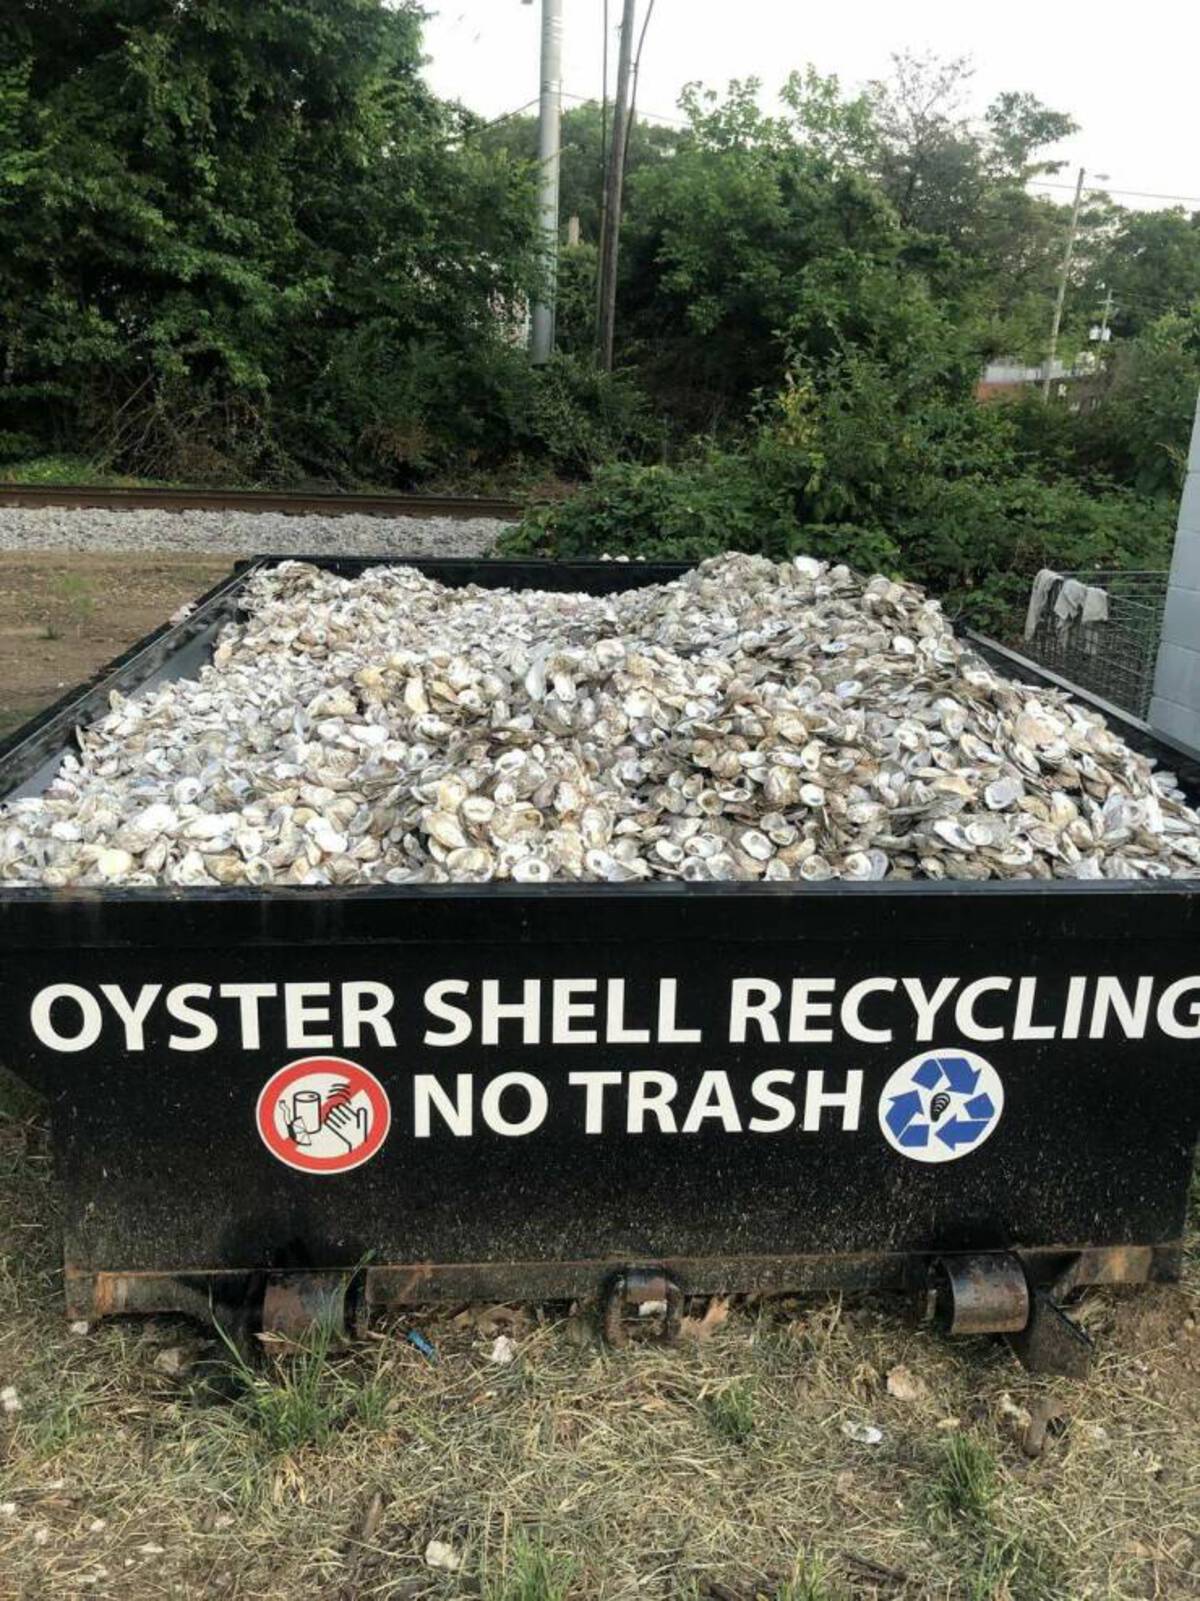 grass - Oyster Shell Recycling No Trash